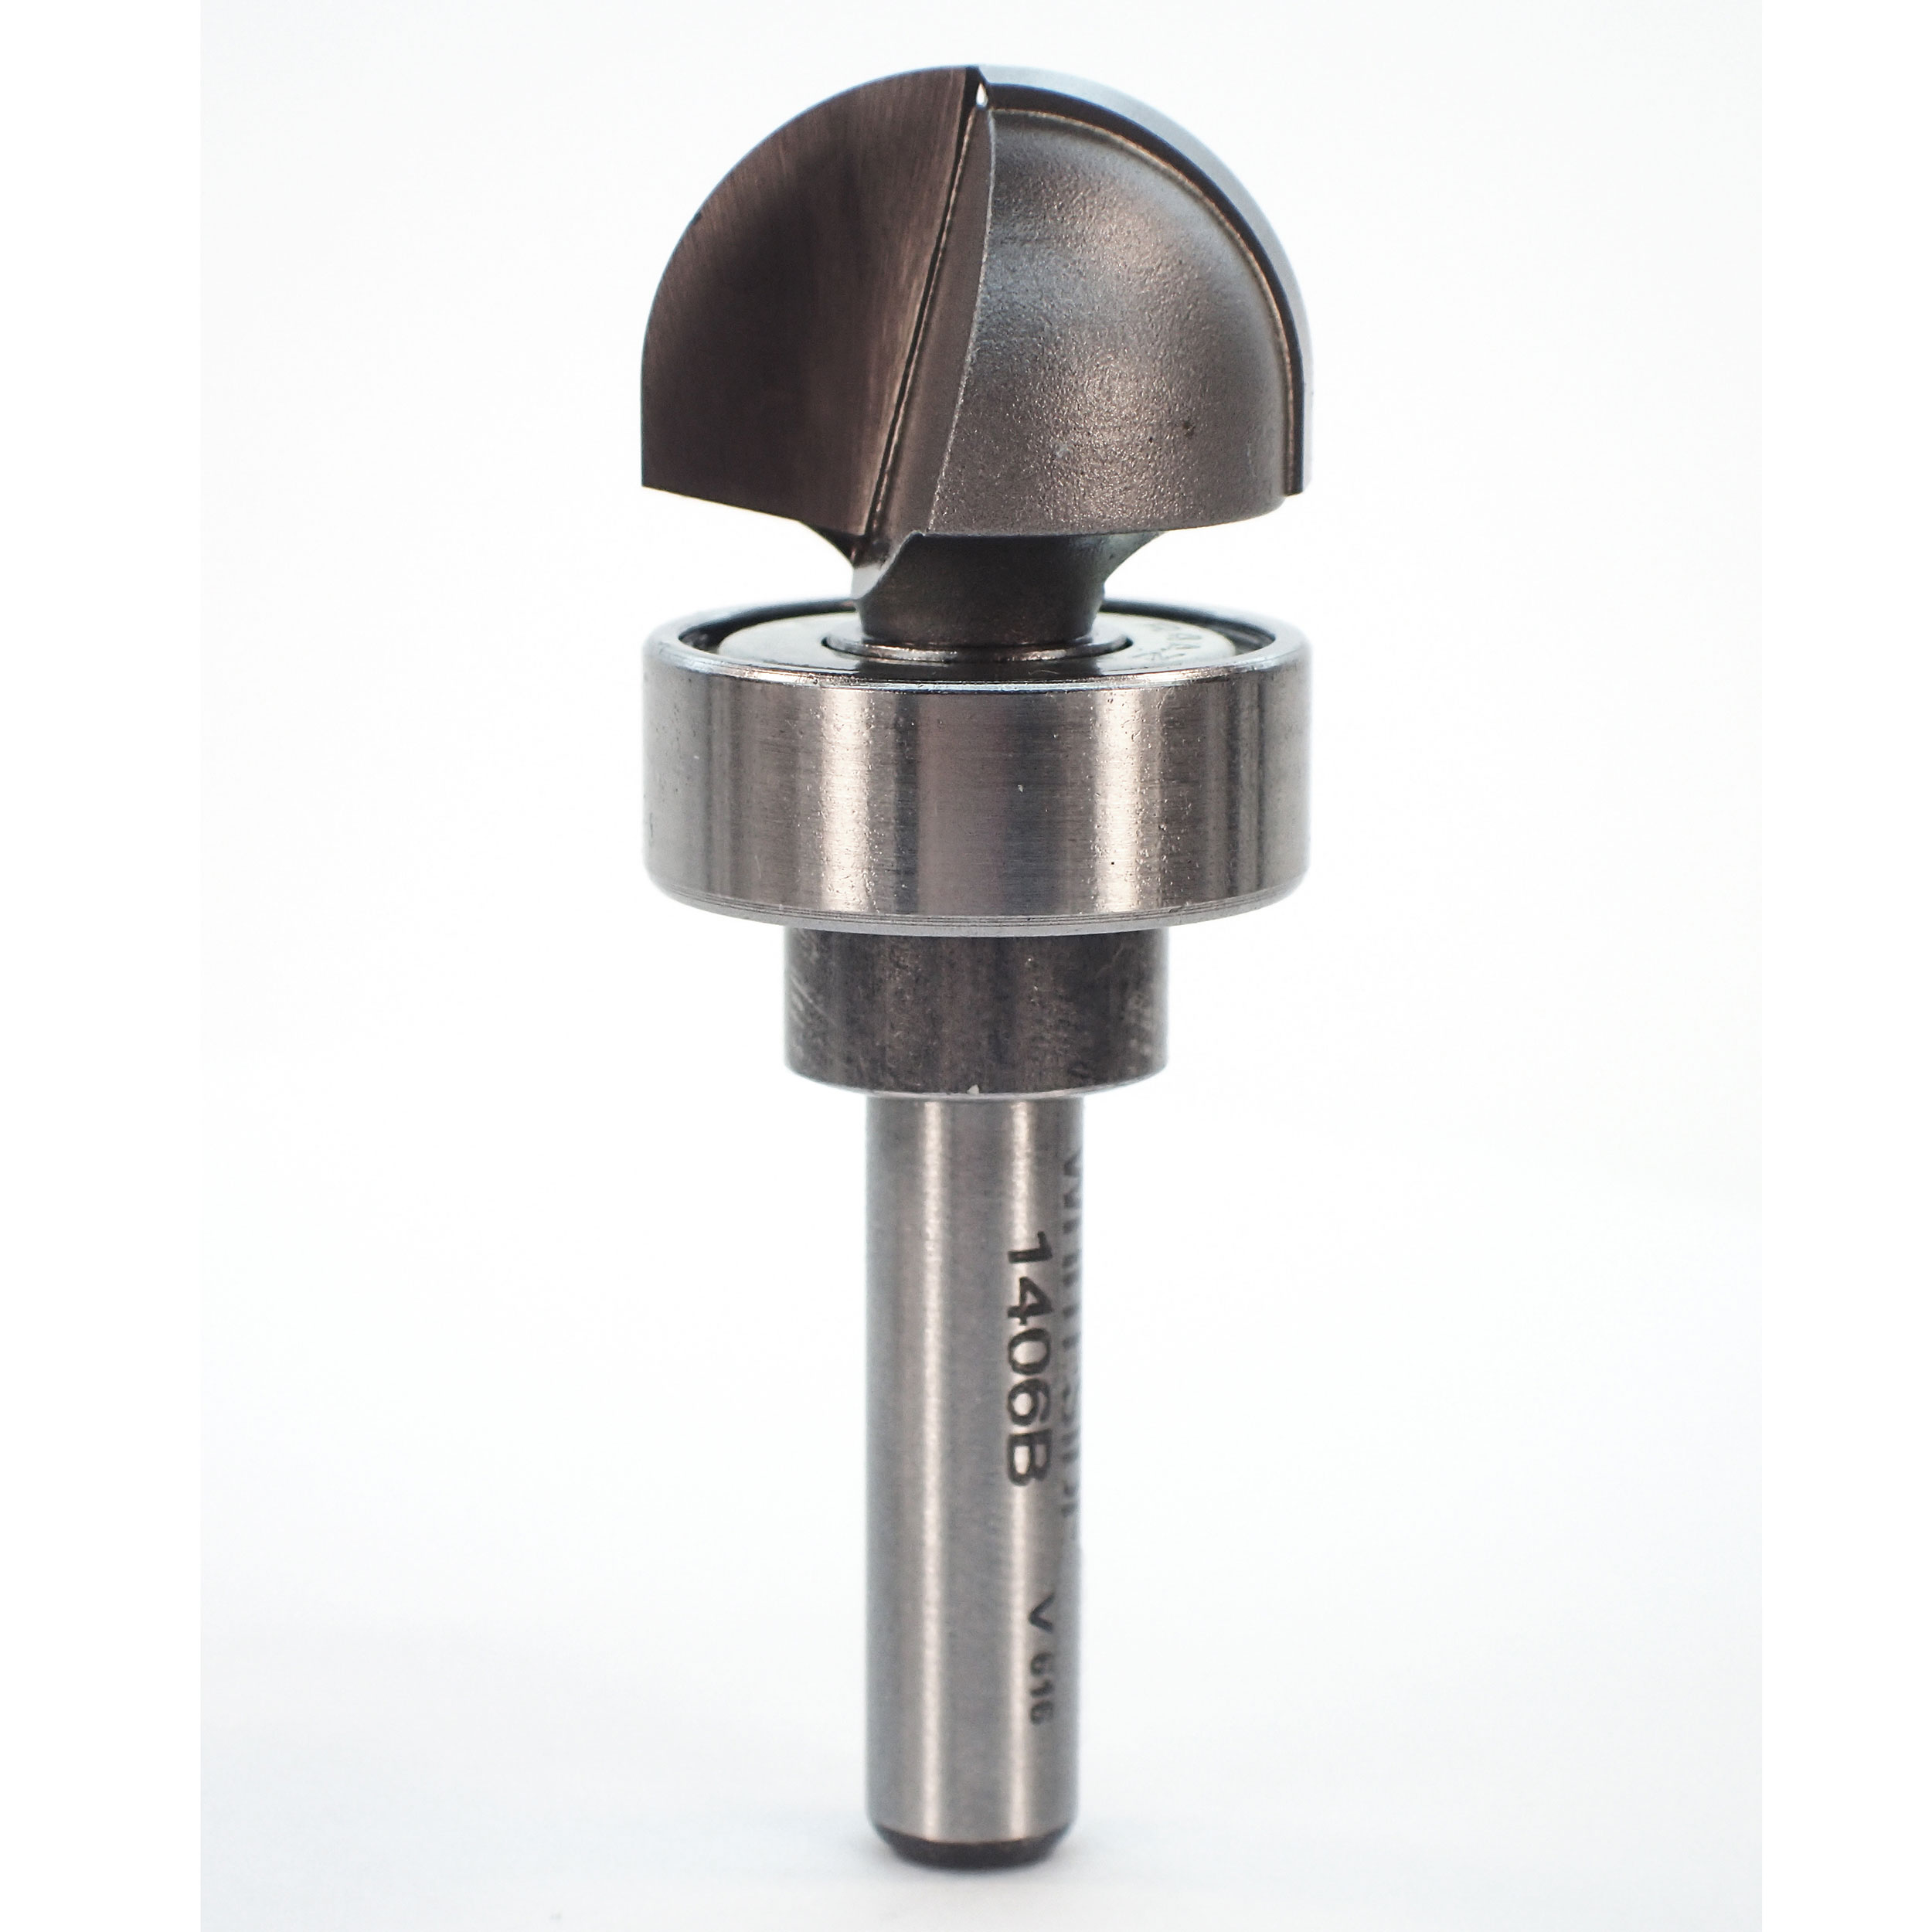 1406b B4 Bearing Round Nose Router Bit With Bearing Guide 3/8" R X 3/4" D X 7/16" Cl X 1/4